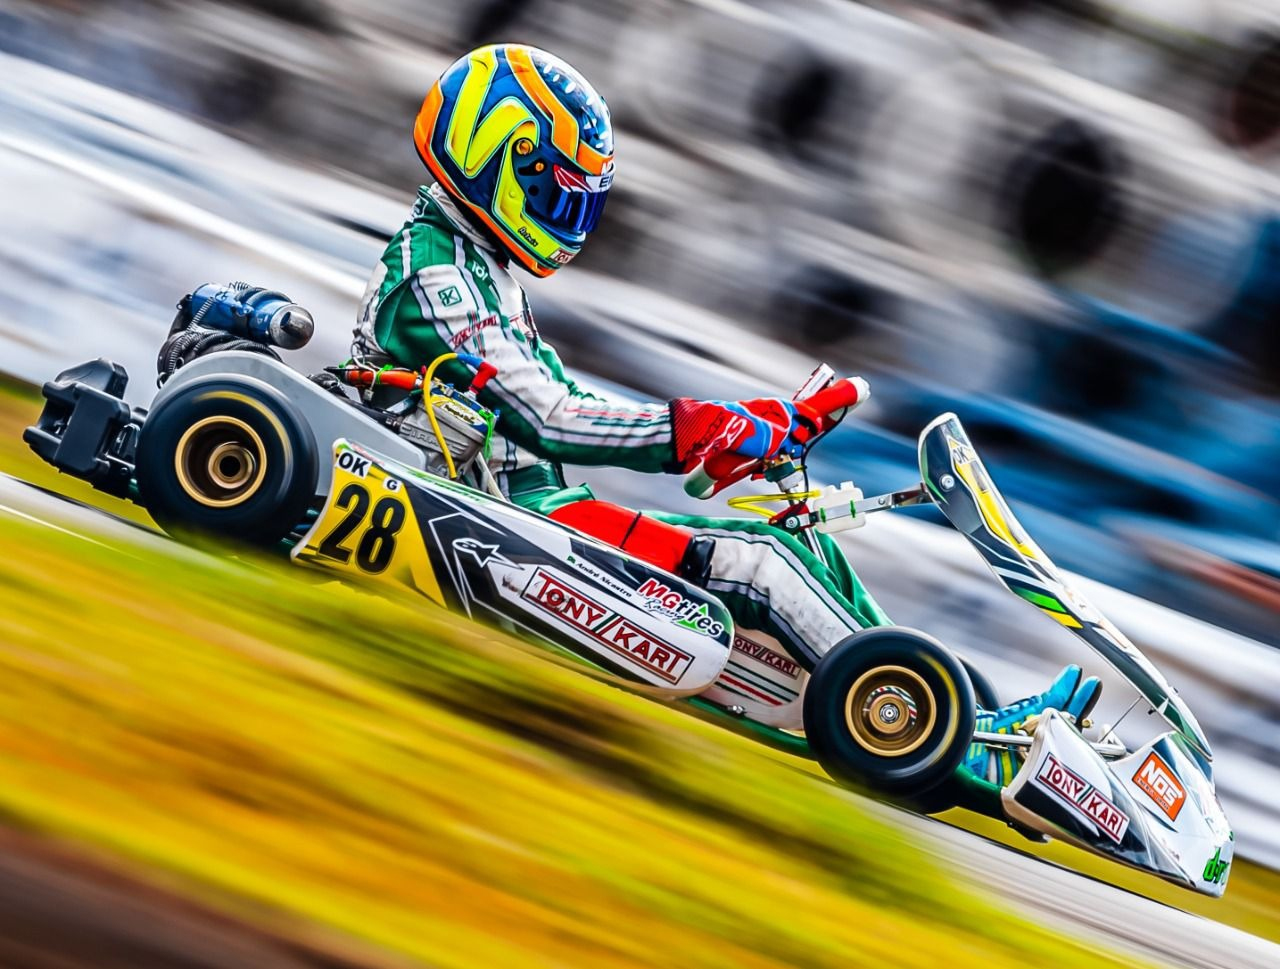 MGTIRES OPENED ITS SEASON IN THE WINTER SERIES 1ST ROUND, IN THE USA